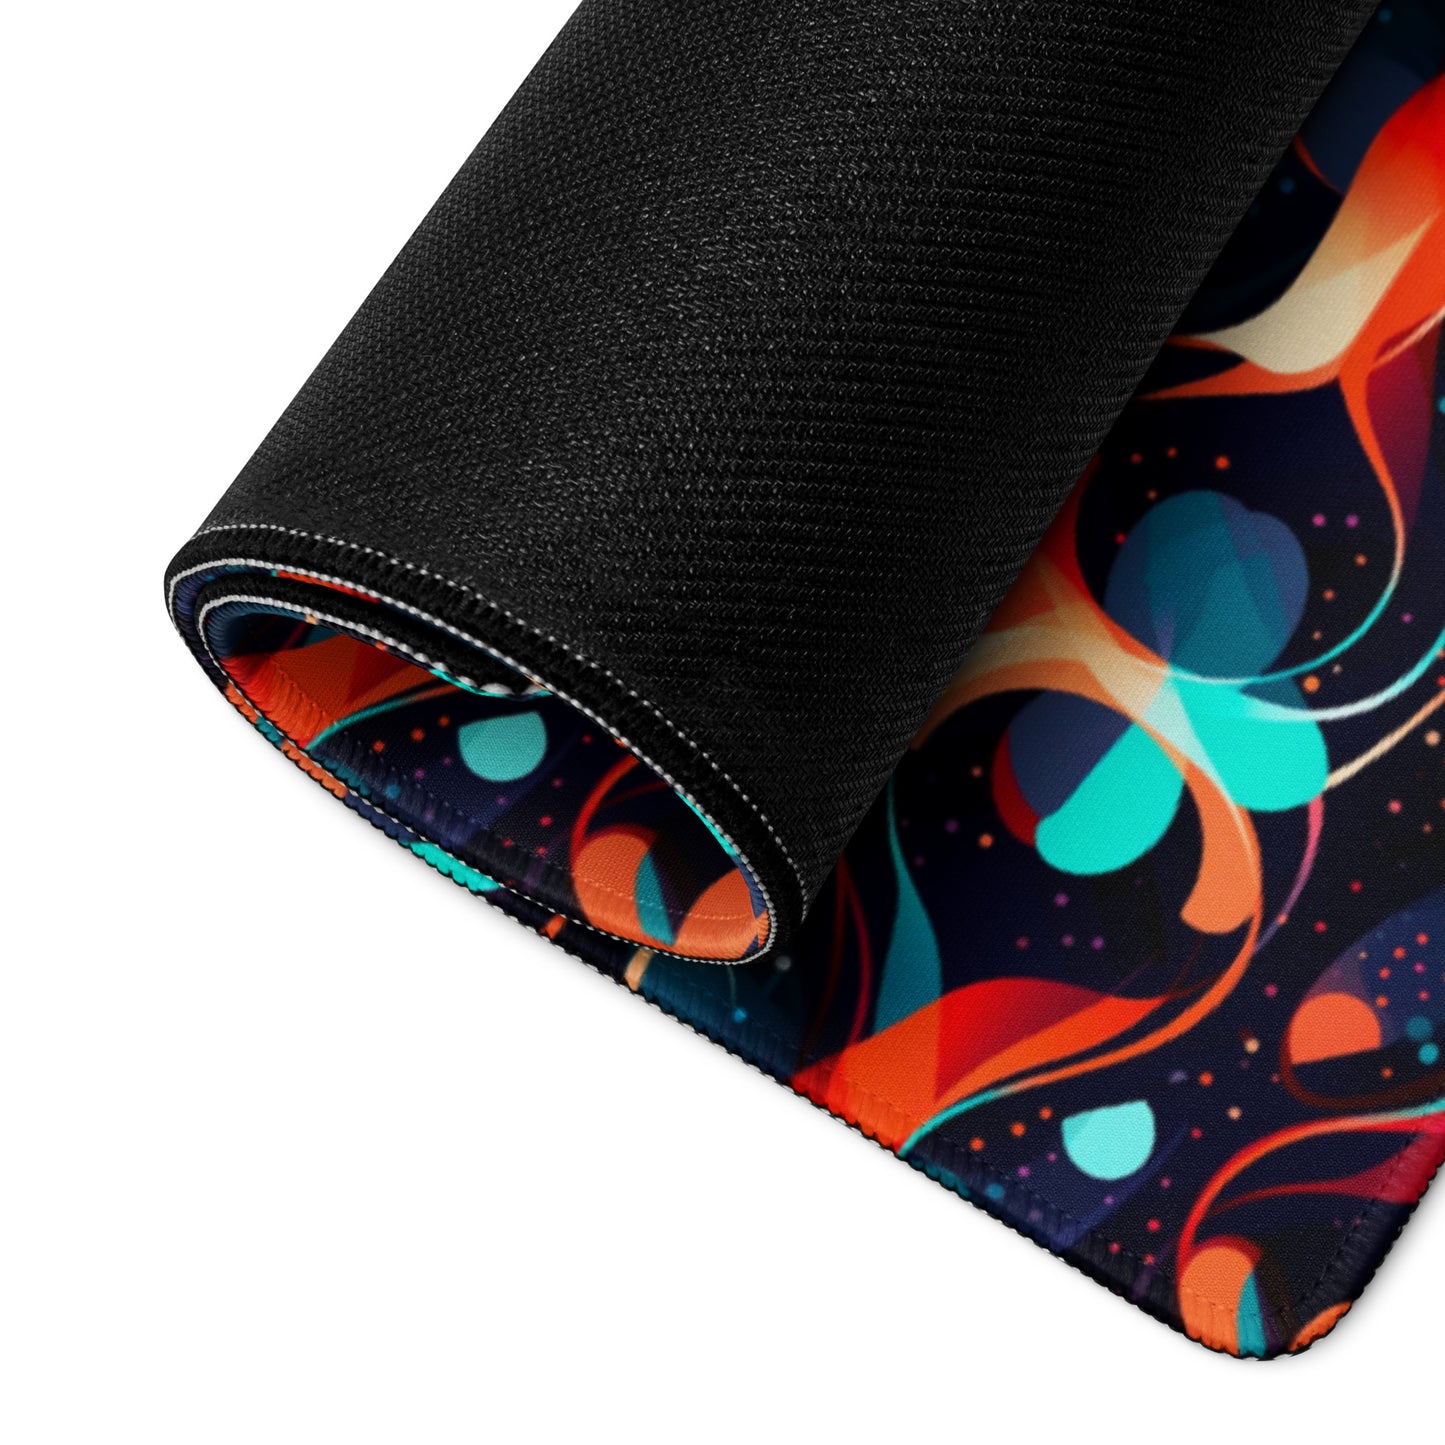 A 36" x 18" desk pad with a wavy orange and blue pattern rolled up.